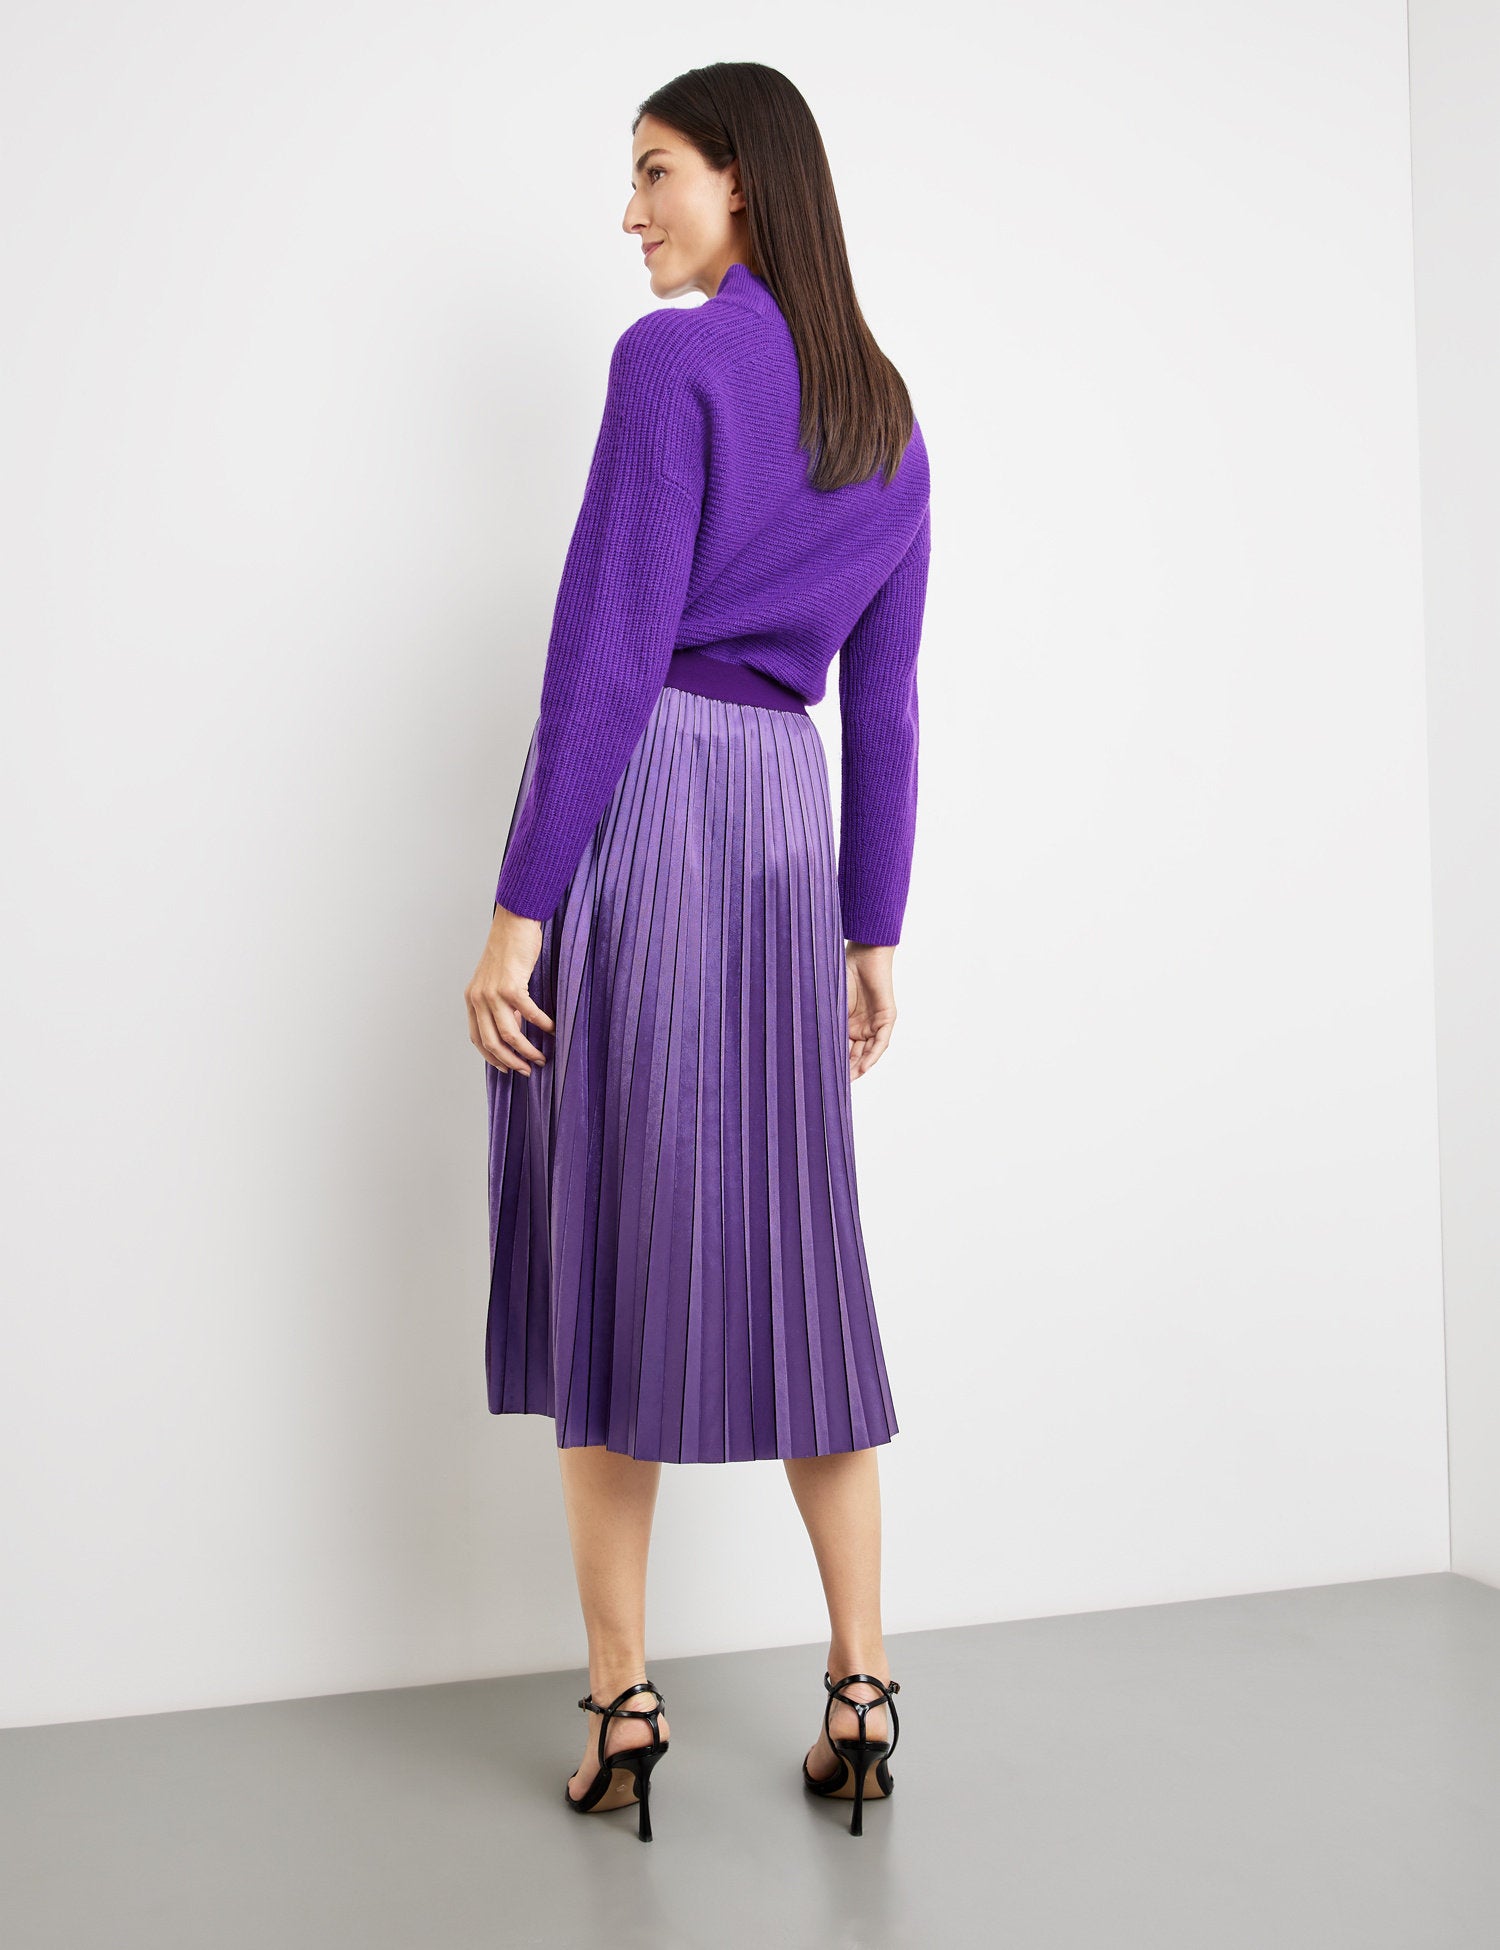 Pleated Skirt With A Subtle Shimmer And An Elasticated Waistband_210036-31531_30909_06